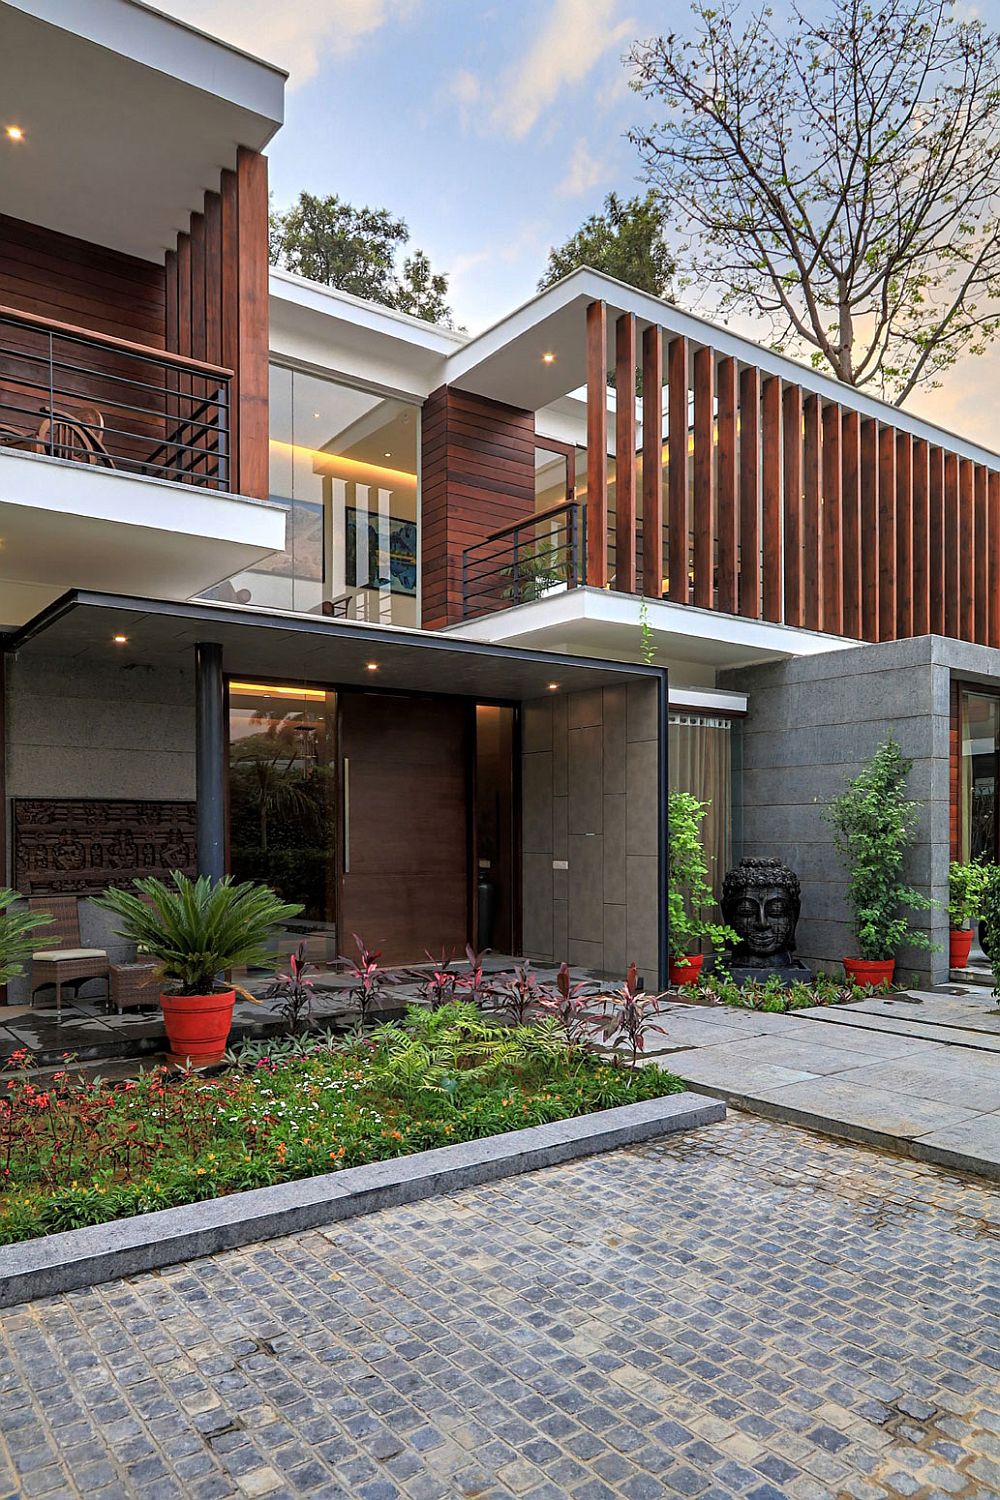 Entrance to the modern house combines Indian design with western style